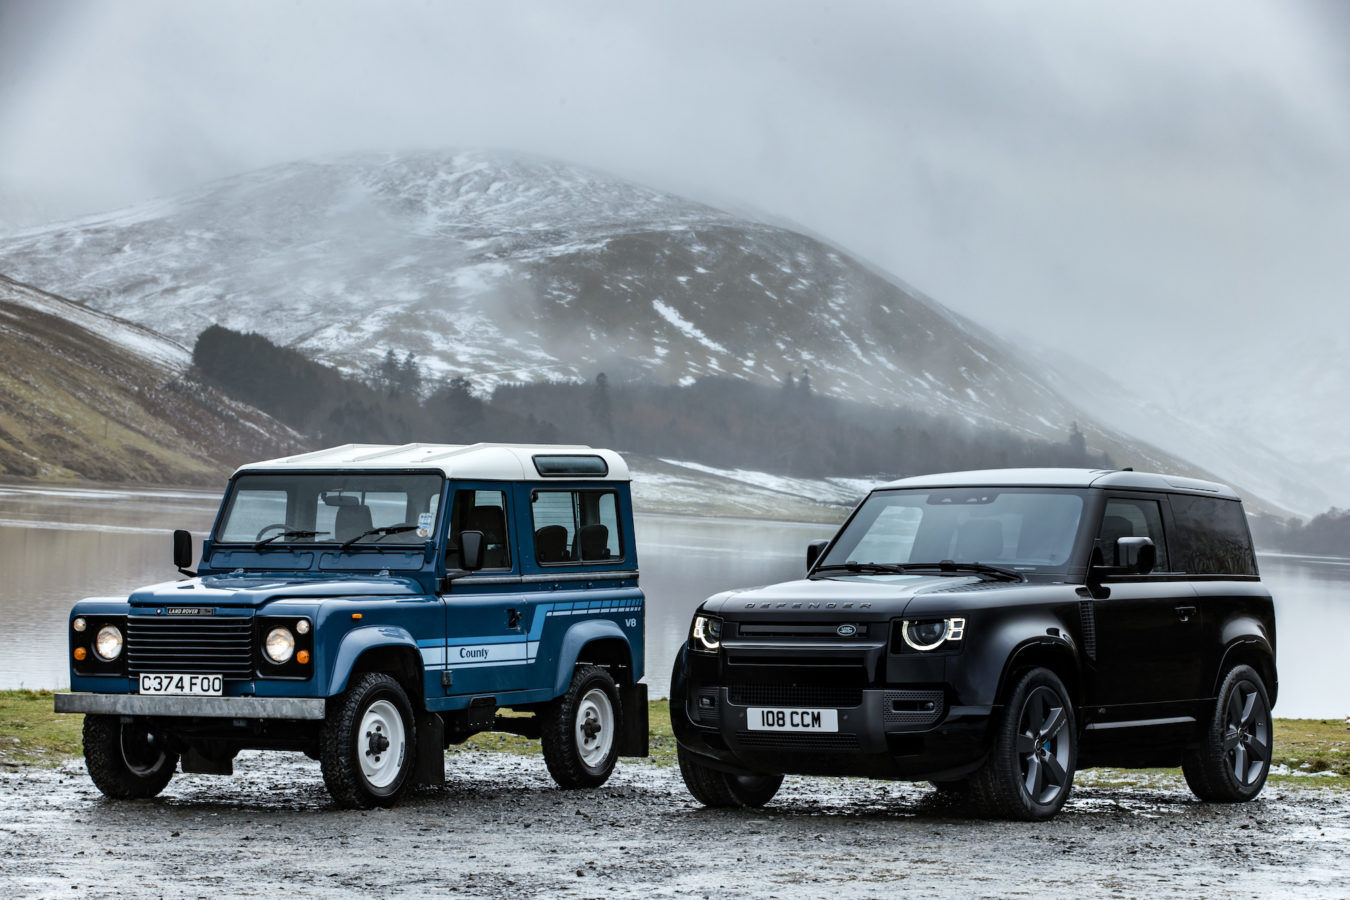 The new Defender V8 is the ultimate expression of Land Rover’s toughest 4×4 